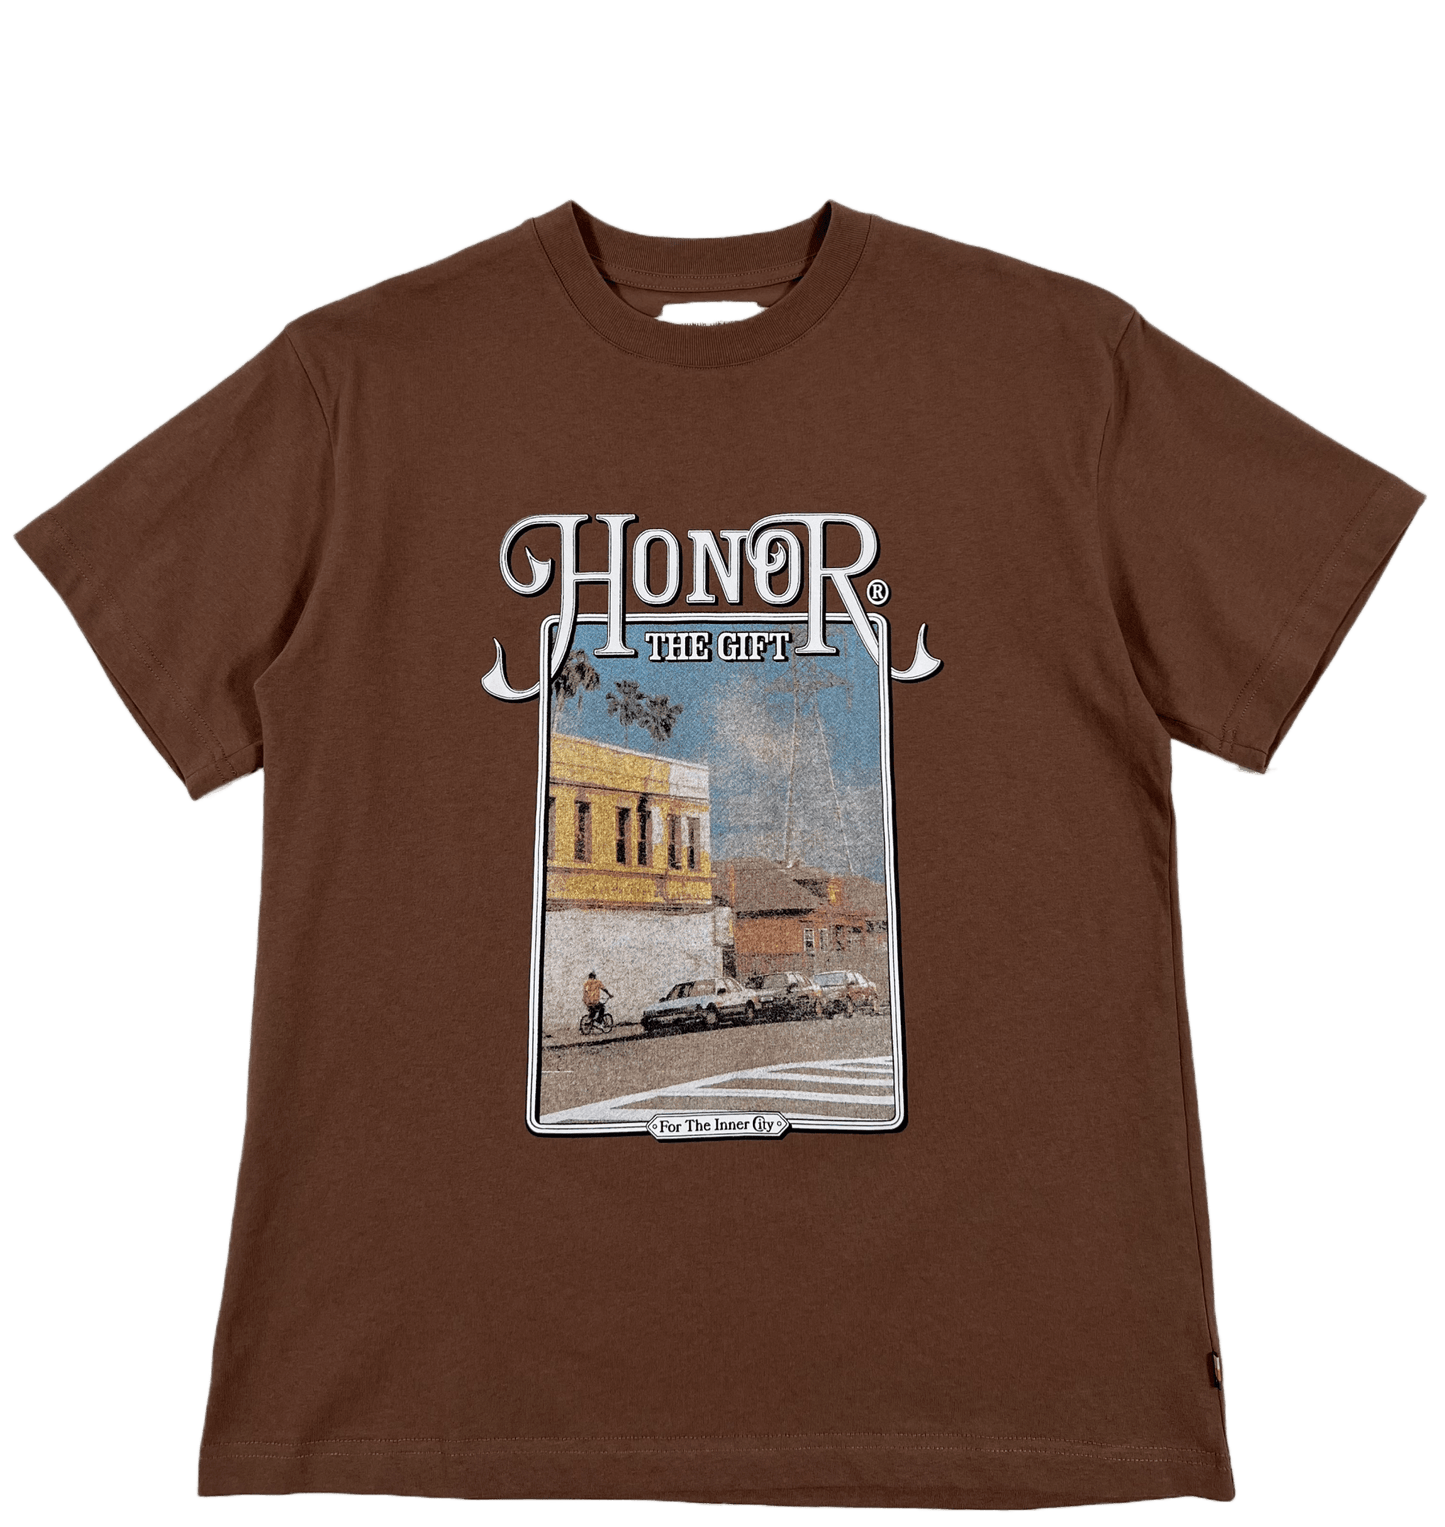 Probus HONOR THE GIFT C-FALL OUR BLOCK S/S TEE BROWN S